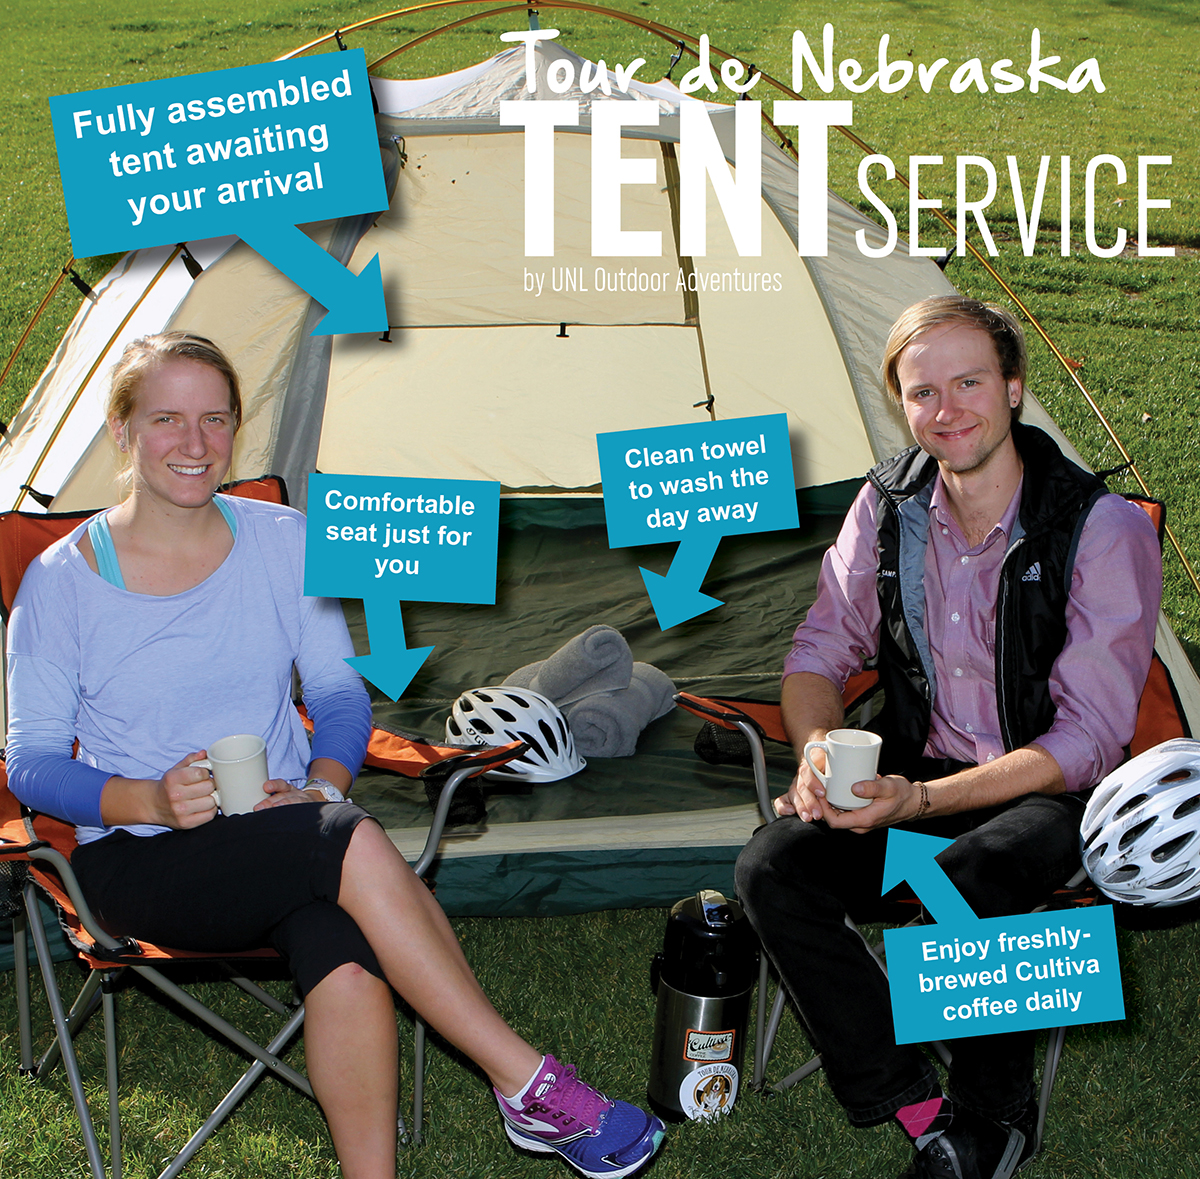 Tent service diagram with tent setup, clean towel each day and chair to sit in.